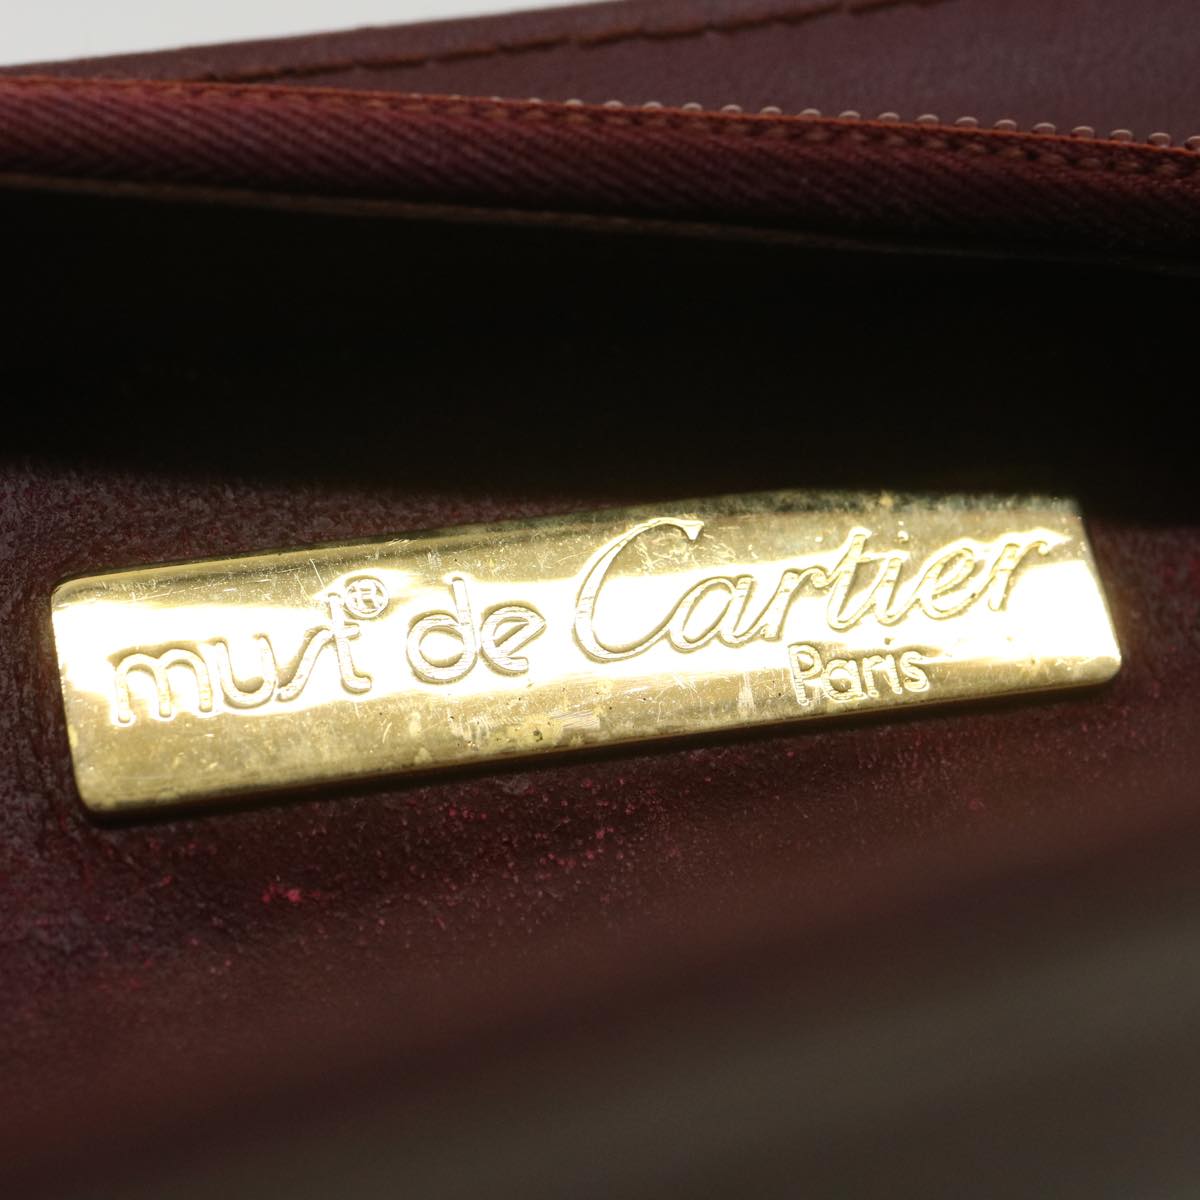 CARTIER Clutch Bag Leather Wine Red Auth 33854